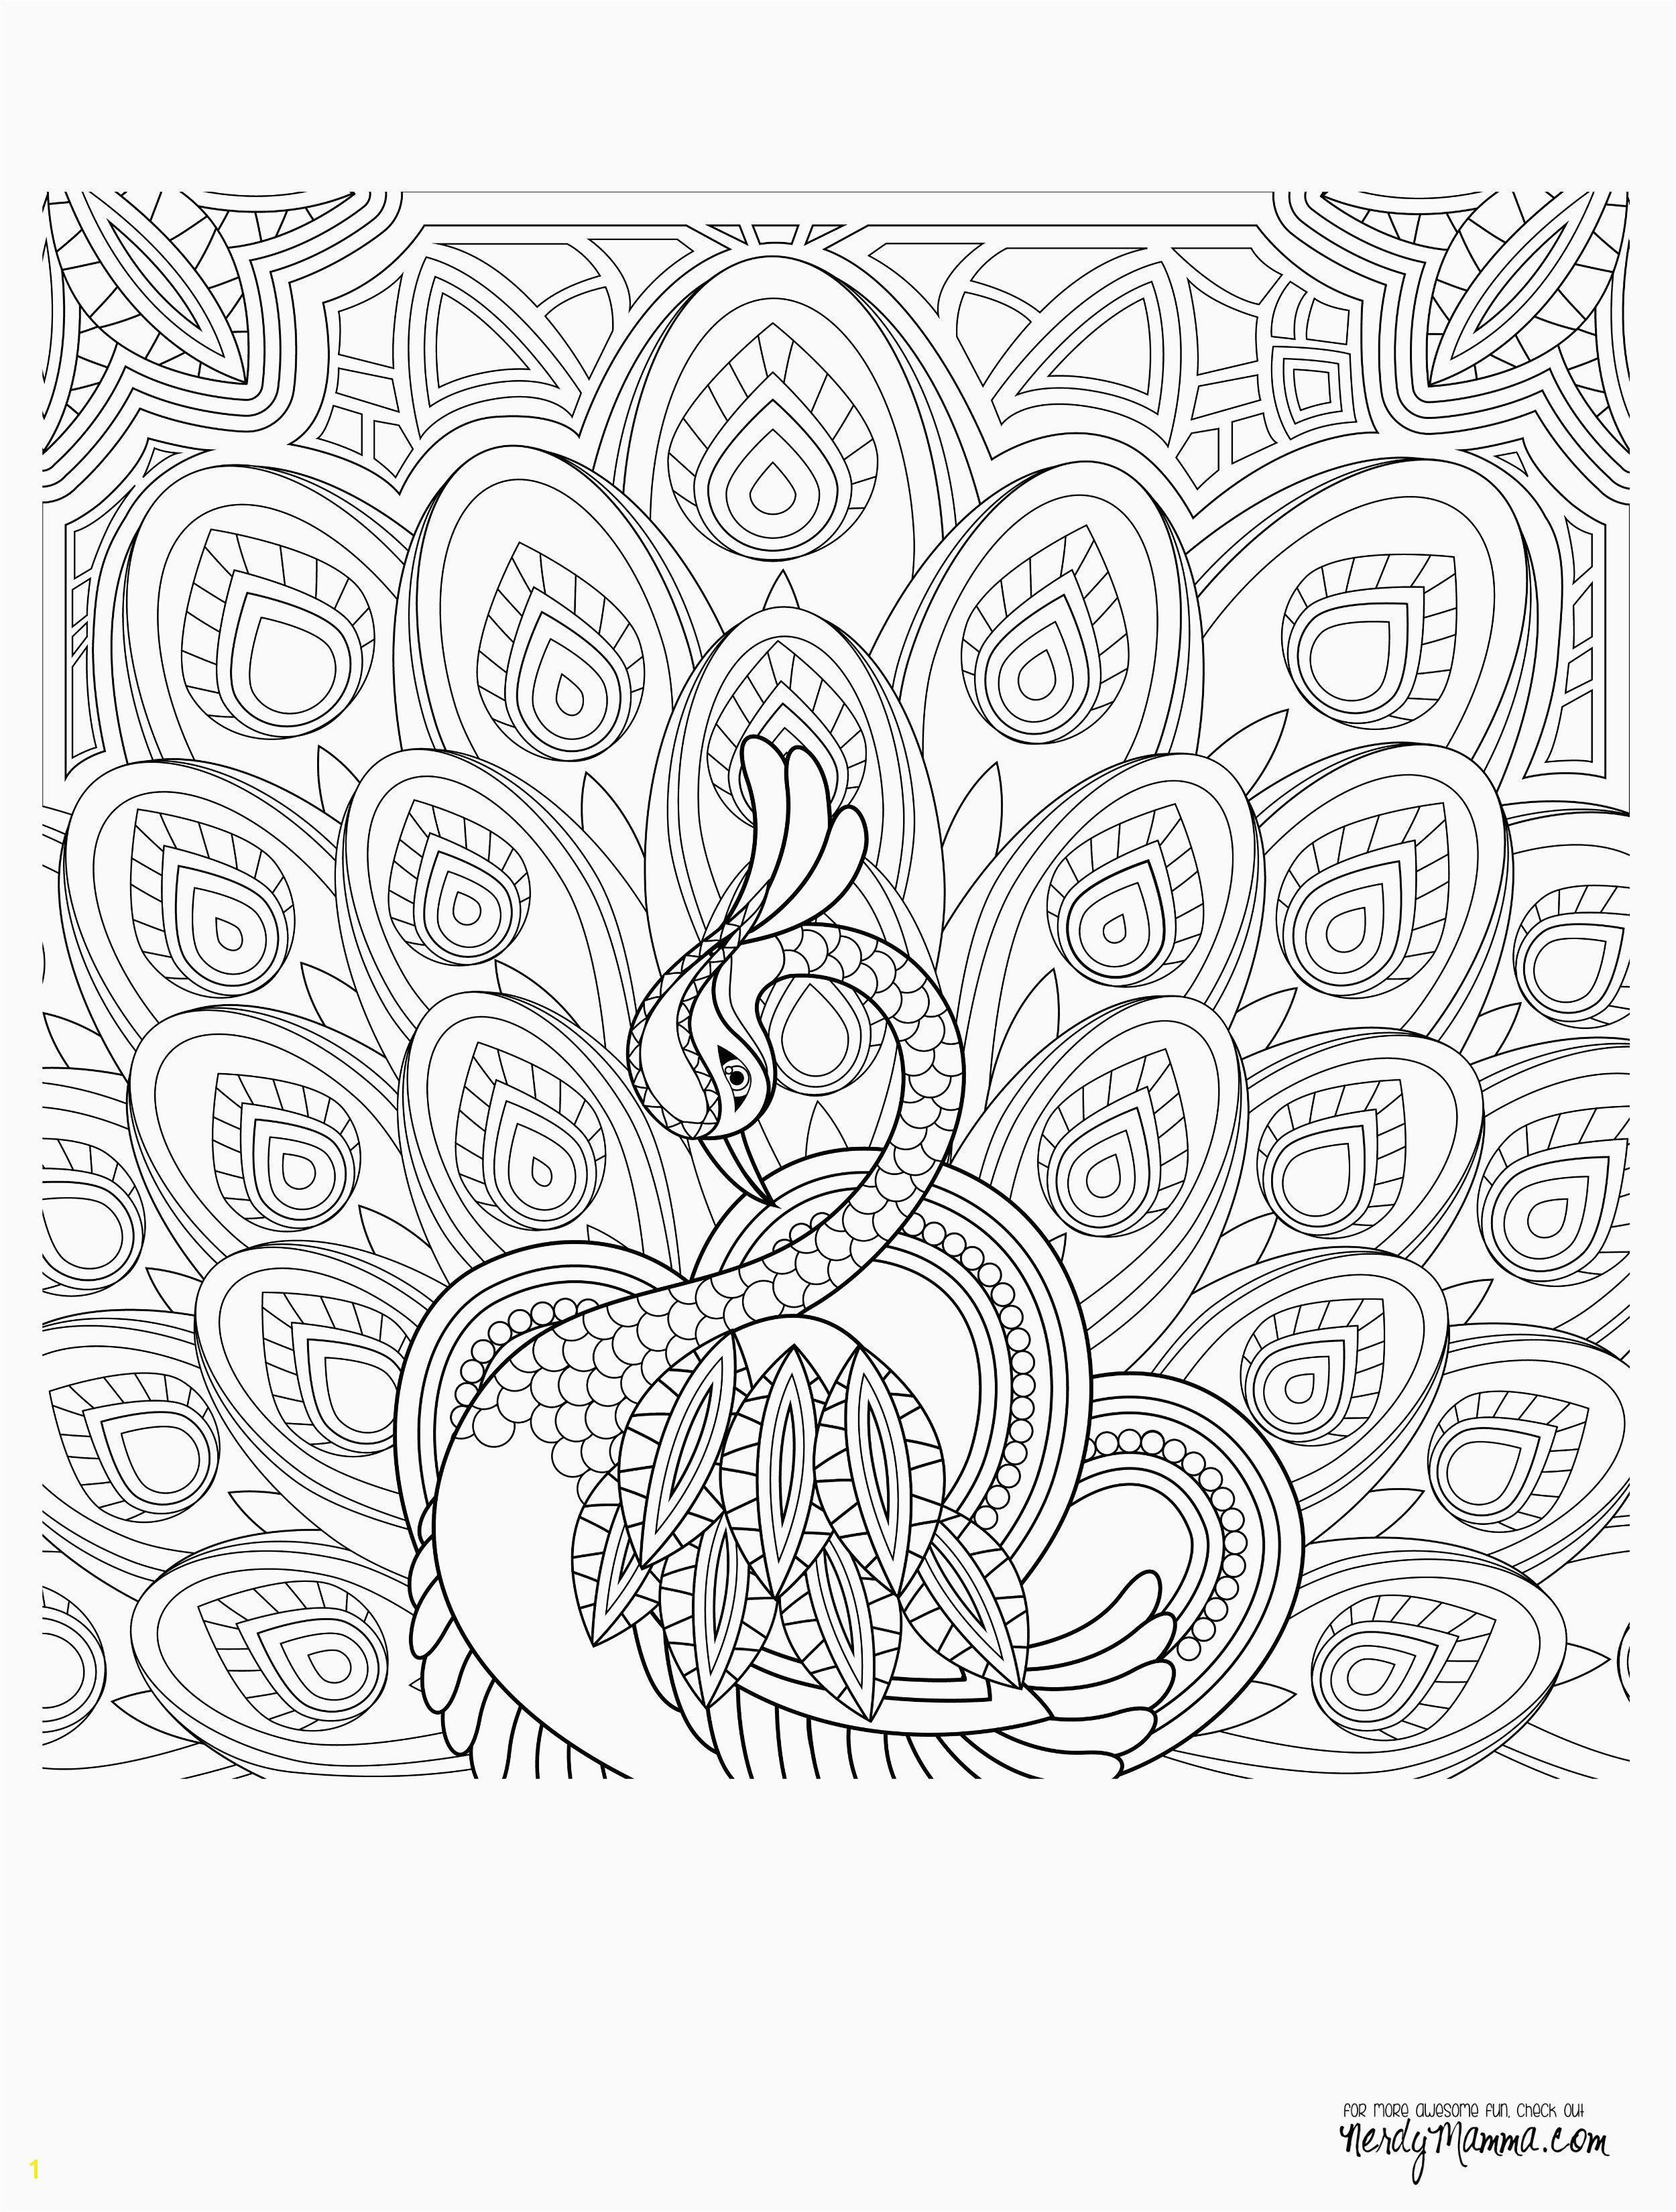 Free Printable Mandala Coloring Pages for Adults Free Printable Coloring Pages for Adults Best Awesome Coloring